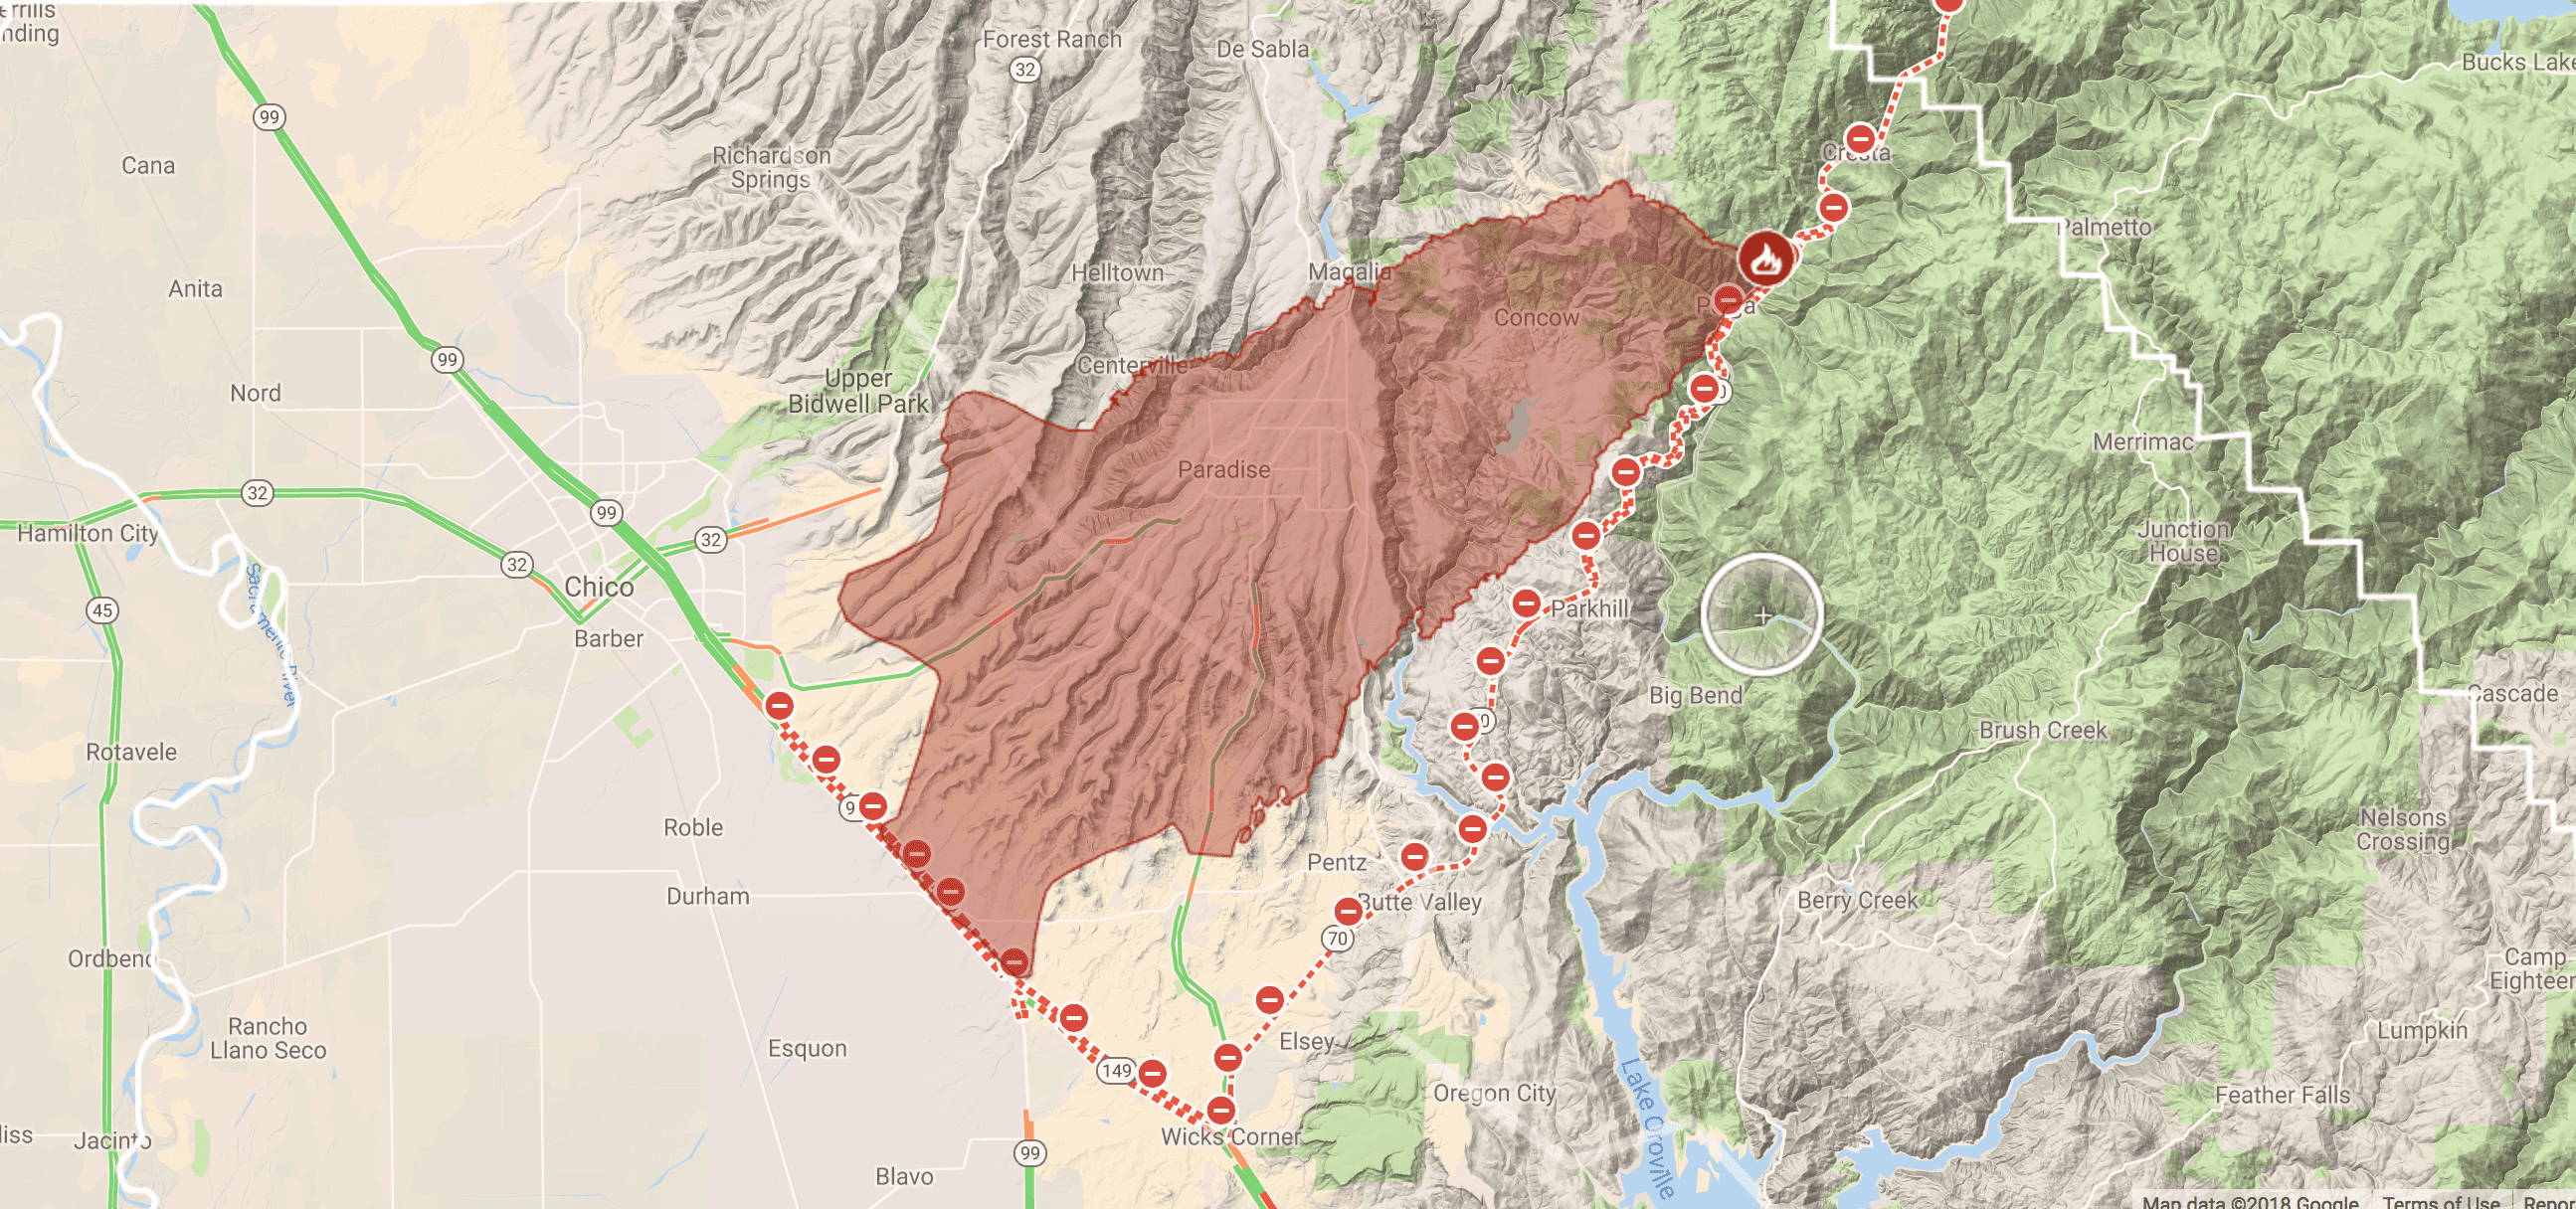 Fire warning area for the Camp Fire located near Paradise, California. [Photo: Google Maps]